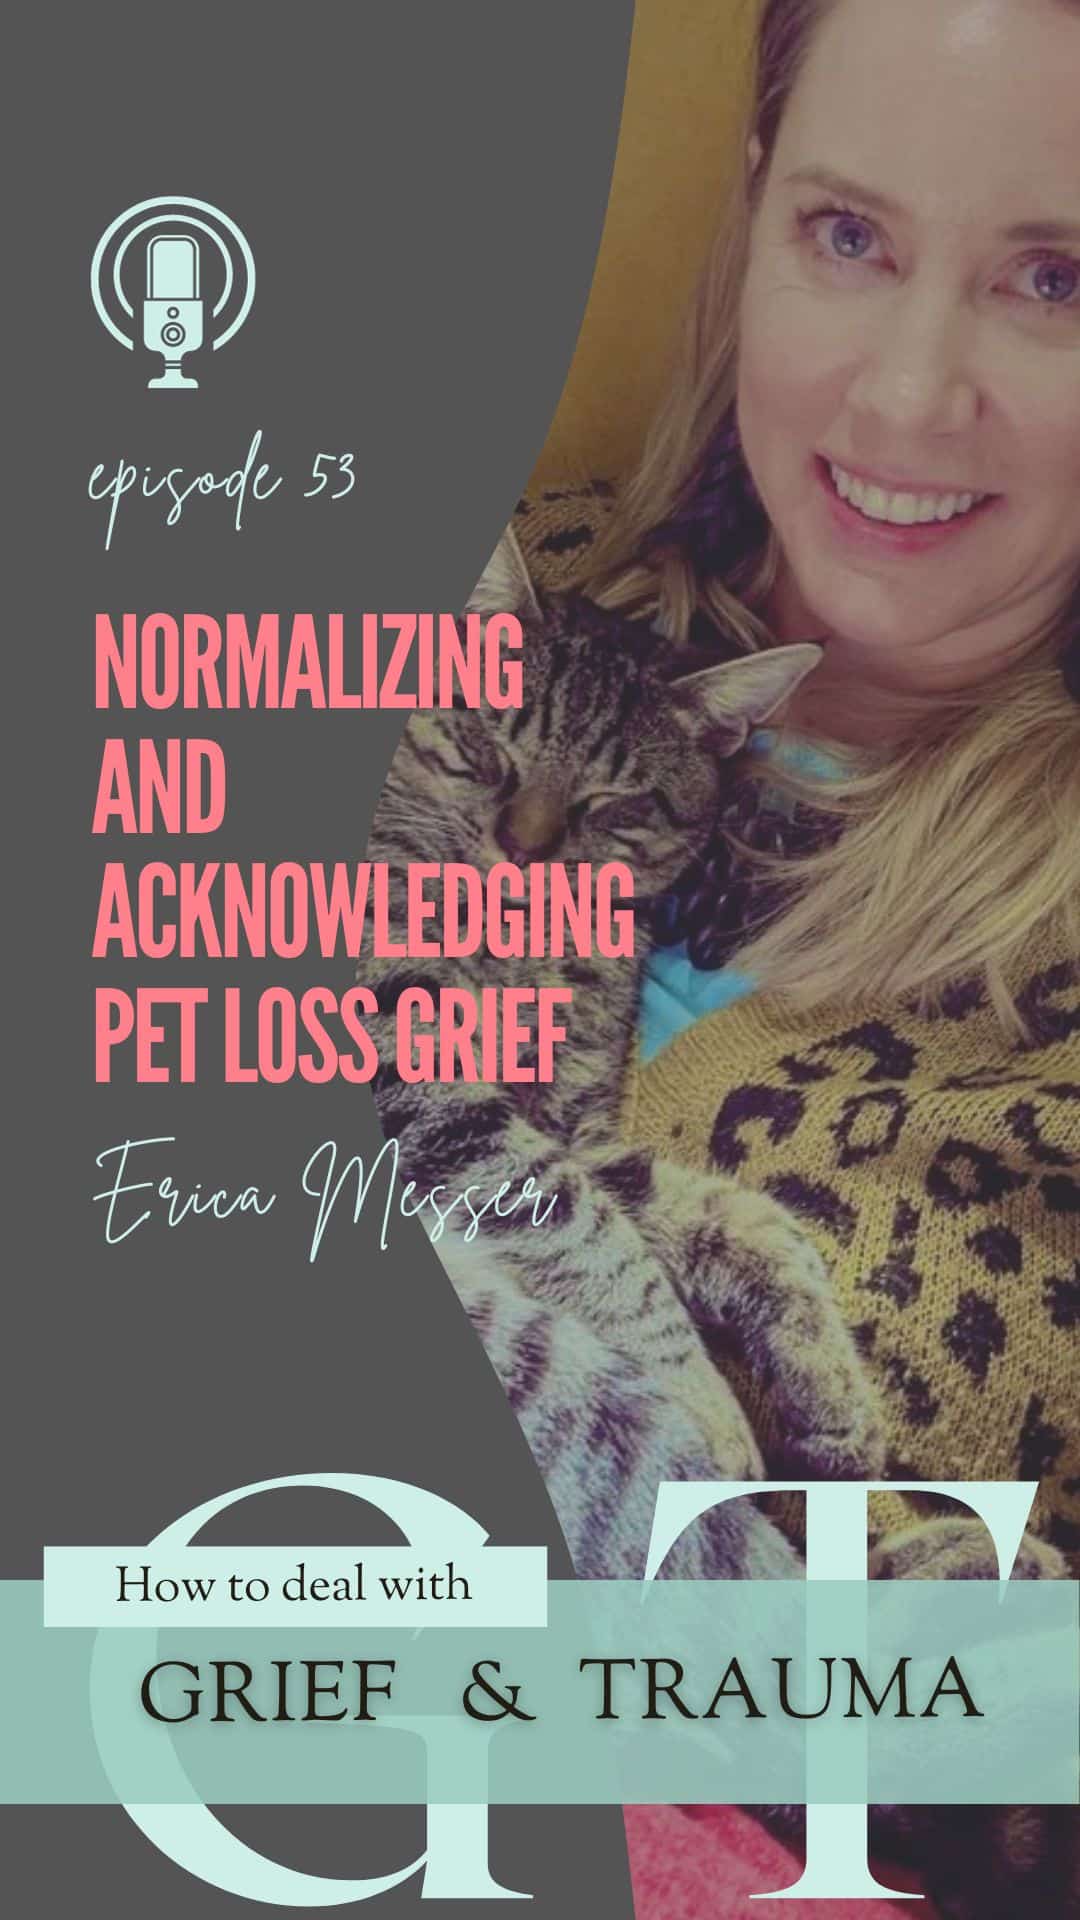 53 Erica Messer Normalizing and Acknowledging Pet Loss Grief